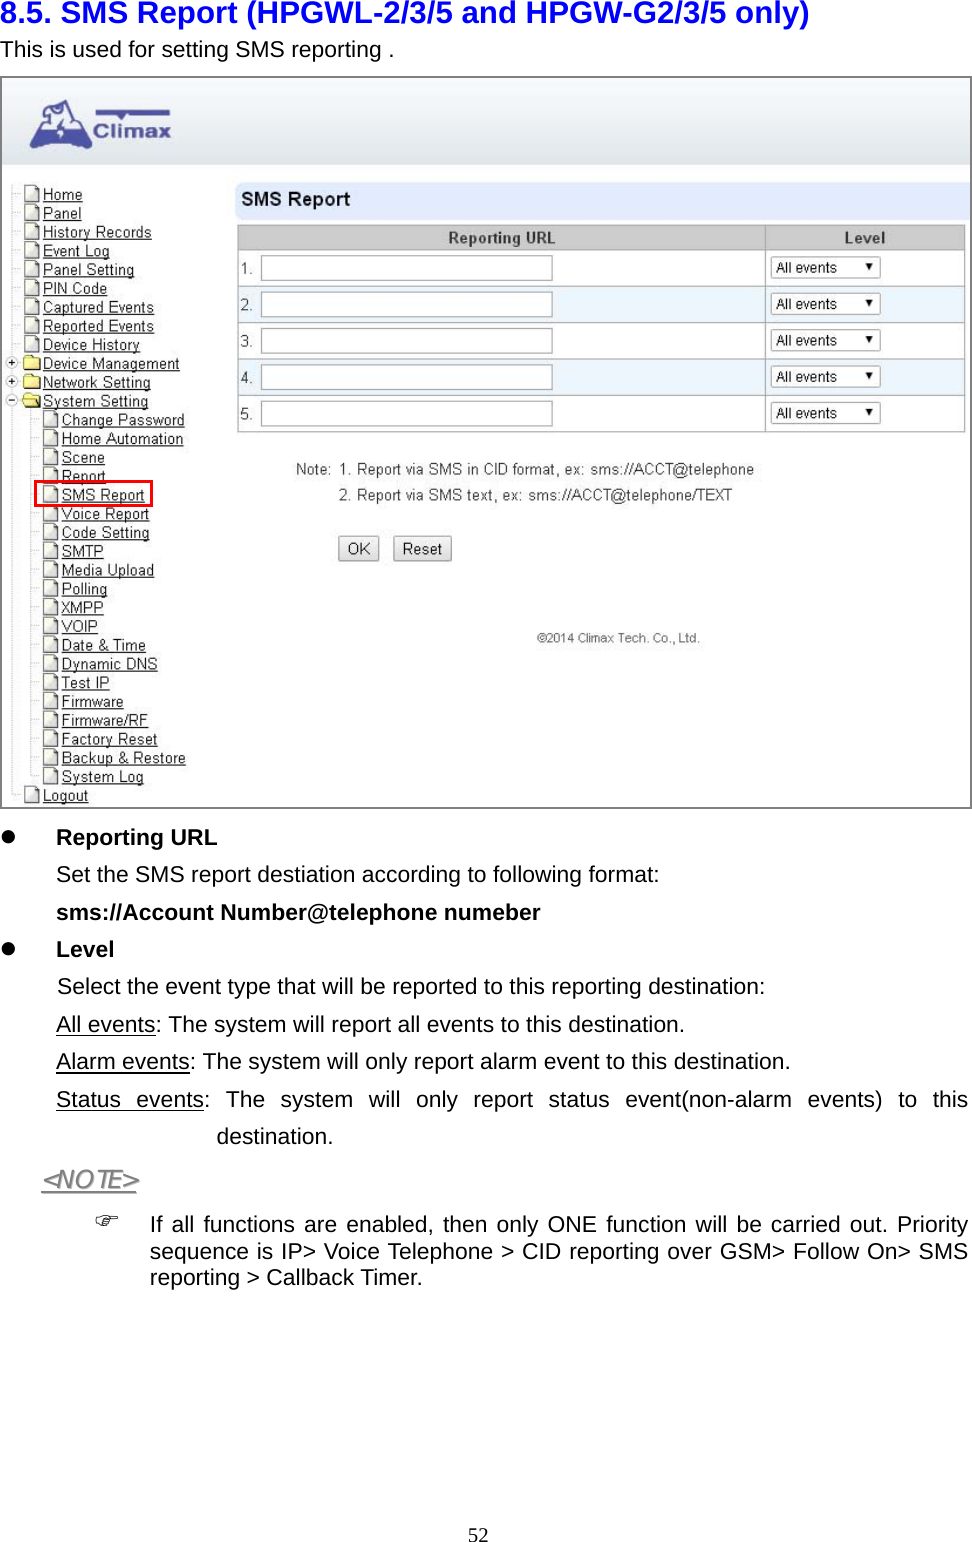  528.5. SMS Report (HPGWL-2/3/5 and HPGW-G2/3/5 only)   This is used for setting SMS reporting .     Reporting URL   Set the SMS report destiation according to following format: sms://Account Number@telephone numeber     Level   Select the event type that will be reported to this reporting destination:   All events: The system will report all events to this destination.   Alarm events: The system will only report alarm event to this destination.   Status events: The system will only report status event(non-alarm events) to this destination. &lt;&lt;NNOOTTEE&gt;&gt;   If all functions are enabled, then only ONE function will be carried out. Priority sequence is IP&gt; Voice Telephone &gt; CID reporting over GSM&gt; Follow On&gt; SMS reporting &gt; Callback Timer.       